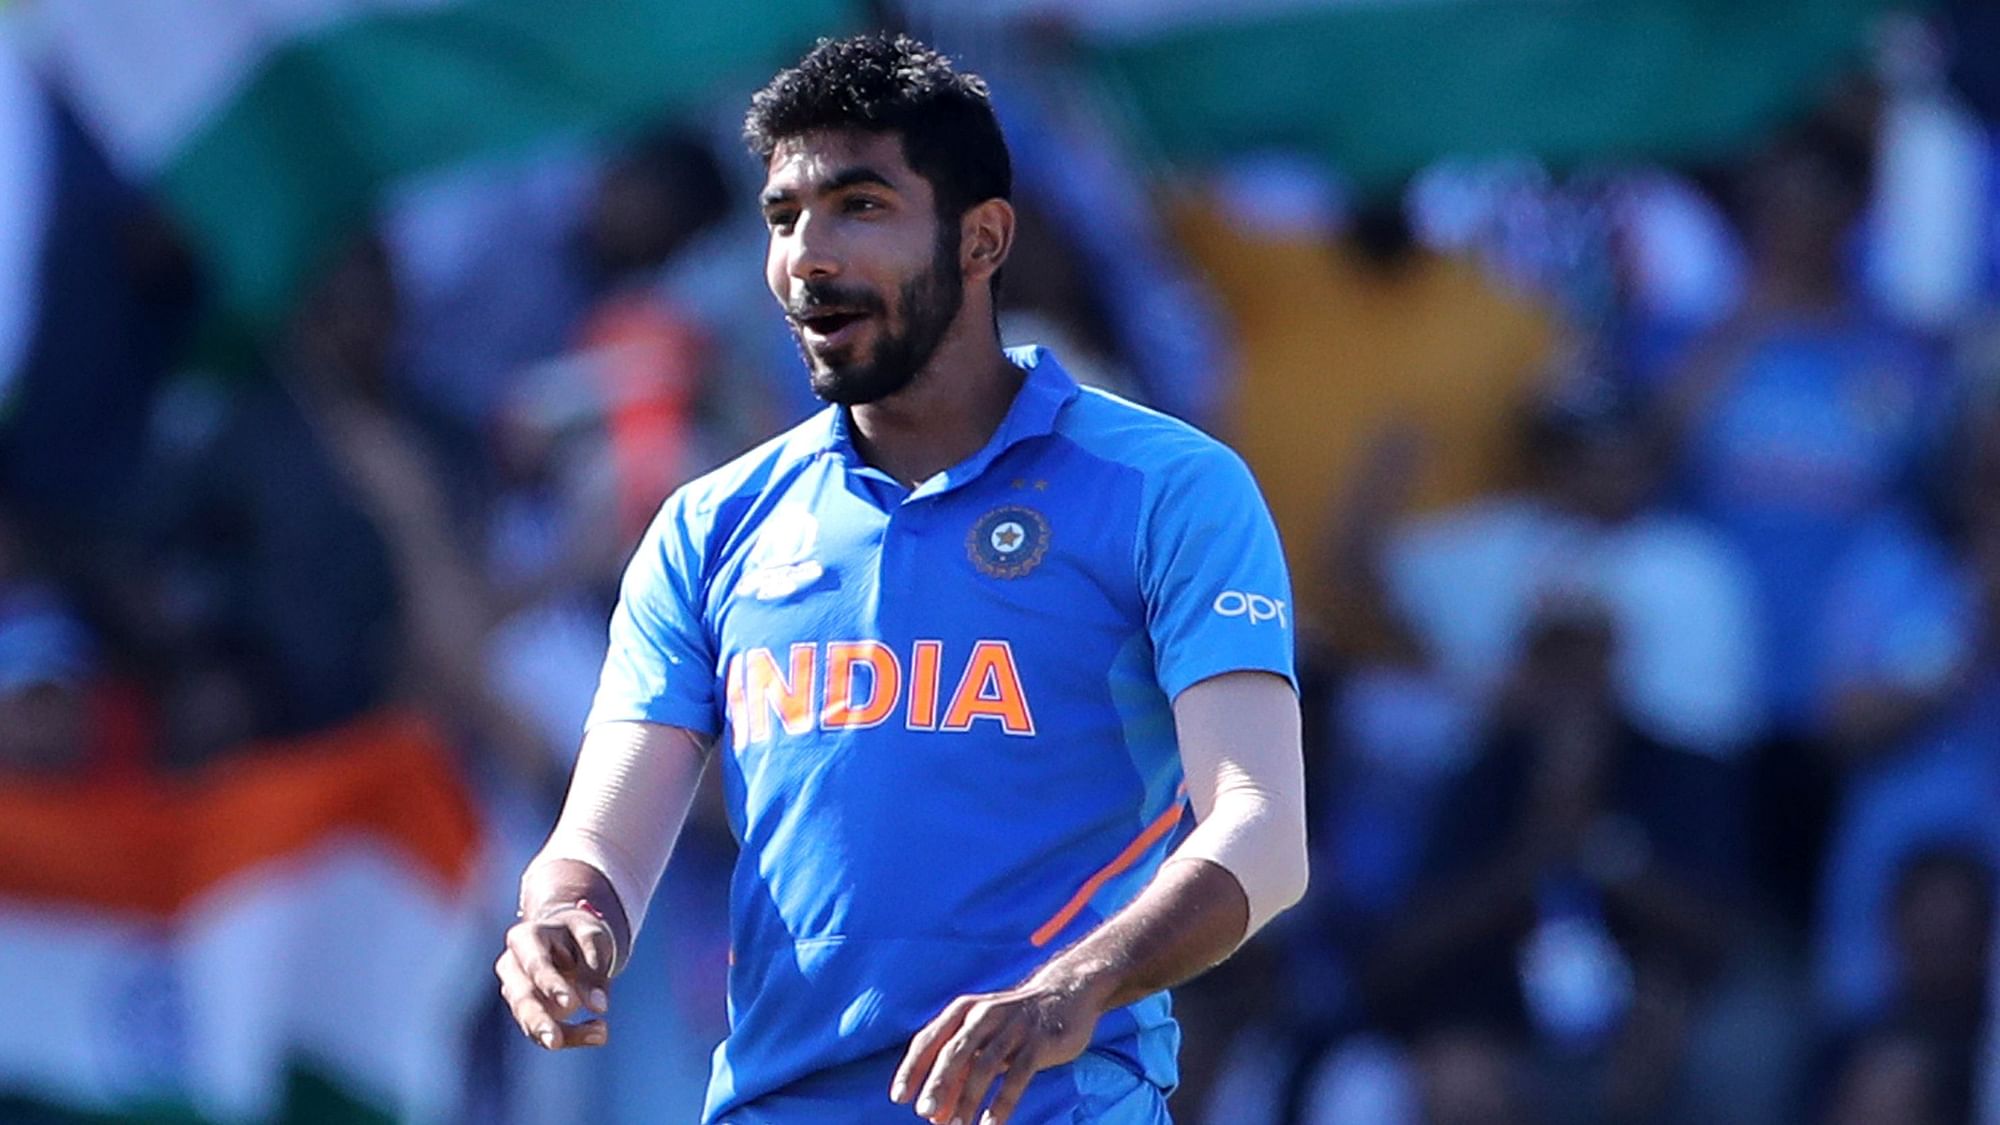 Injured India speedster Jasprit Bumrah is number one in the ODI bowler rankings and number 5 in the Test bowler rankings.